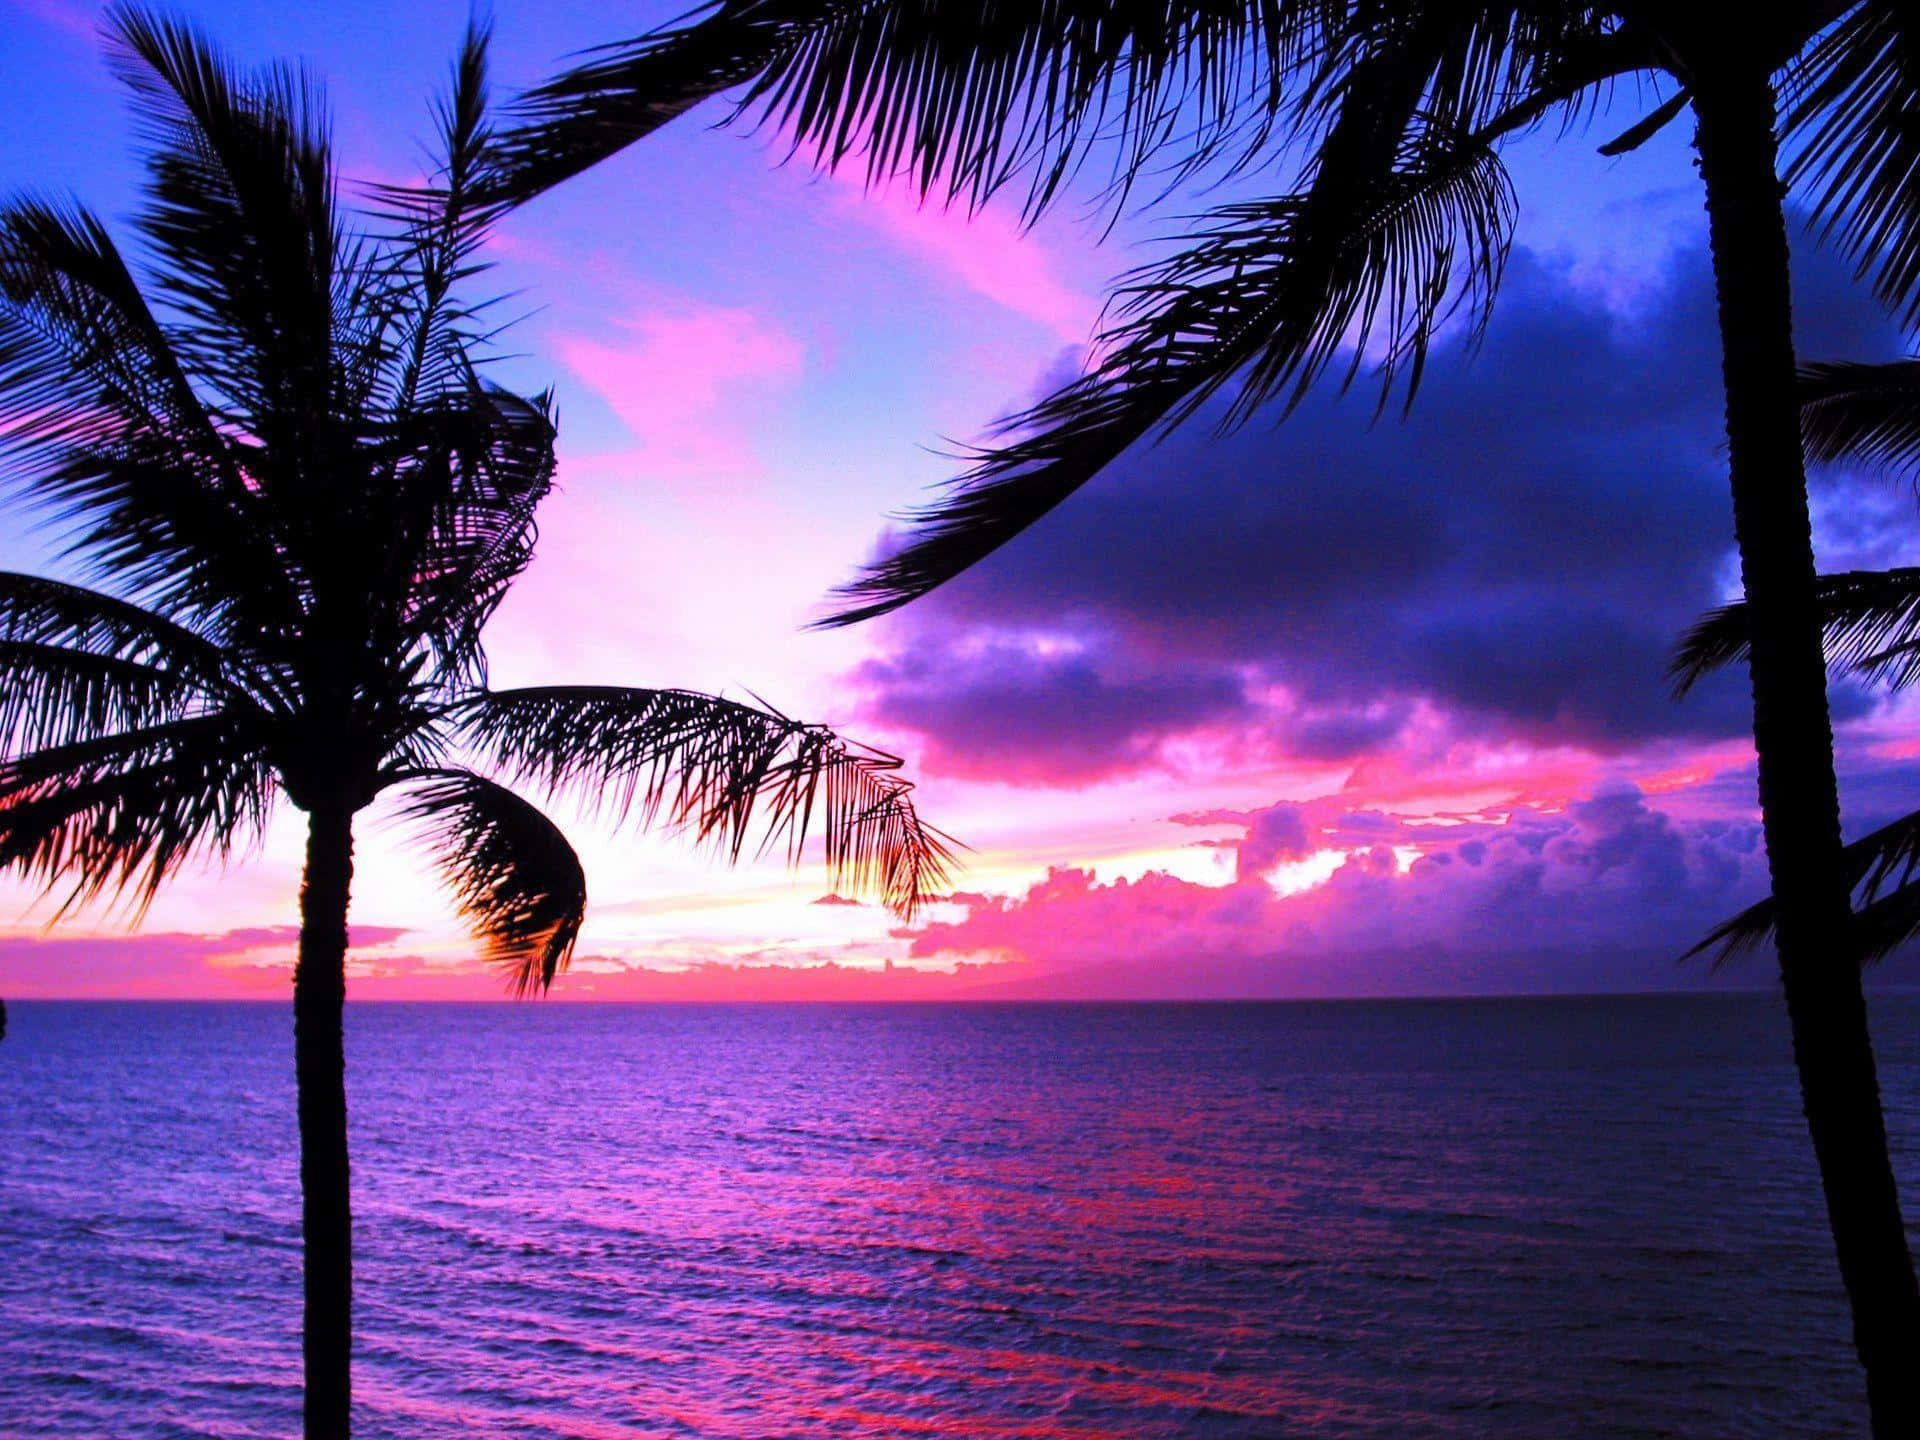 "Take in the stunning view of a Hawaiian sunset with pink and purple hues." Wallpaper